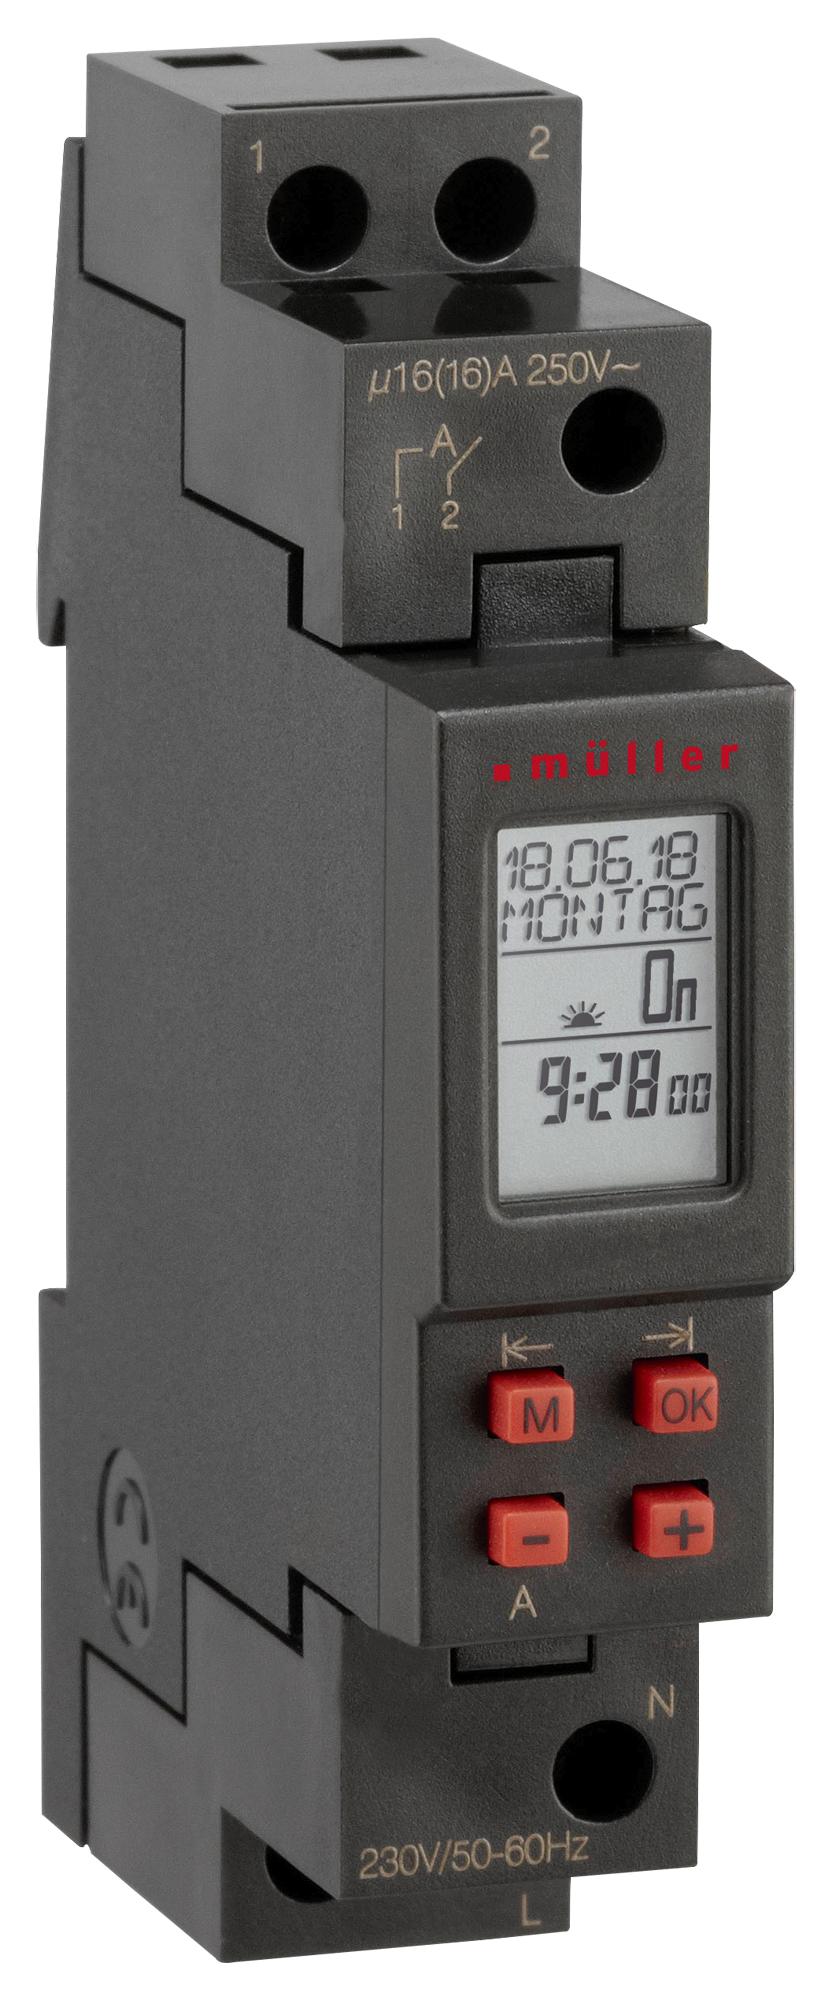 SC08.13 ASTRO DIGITAL TIME SWITCH 1 CHANNEL MULLER